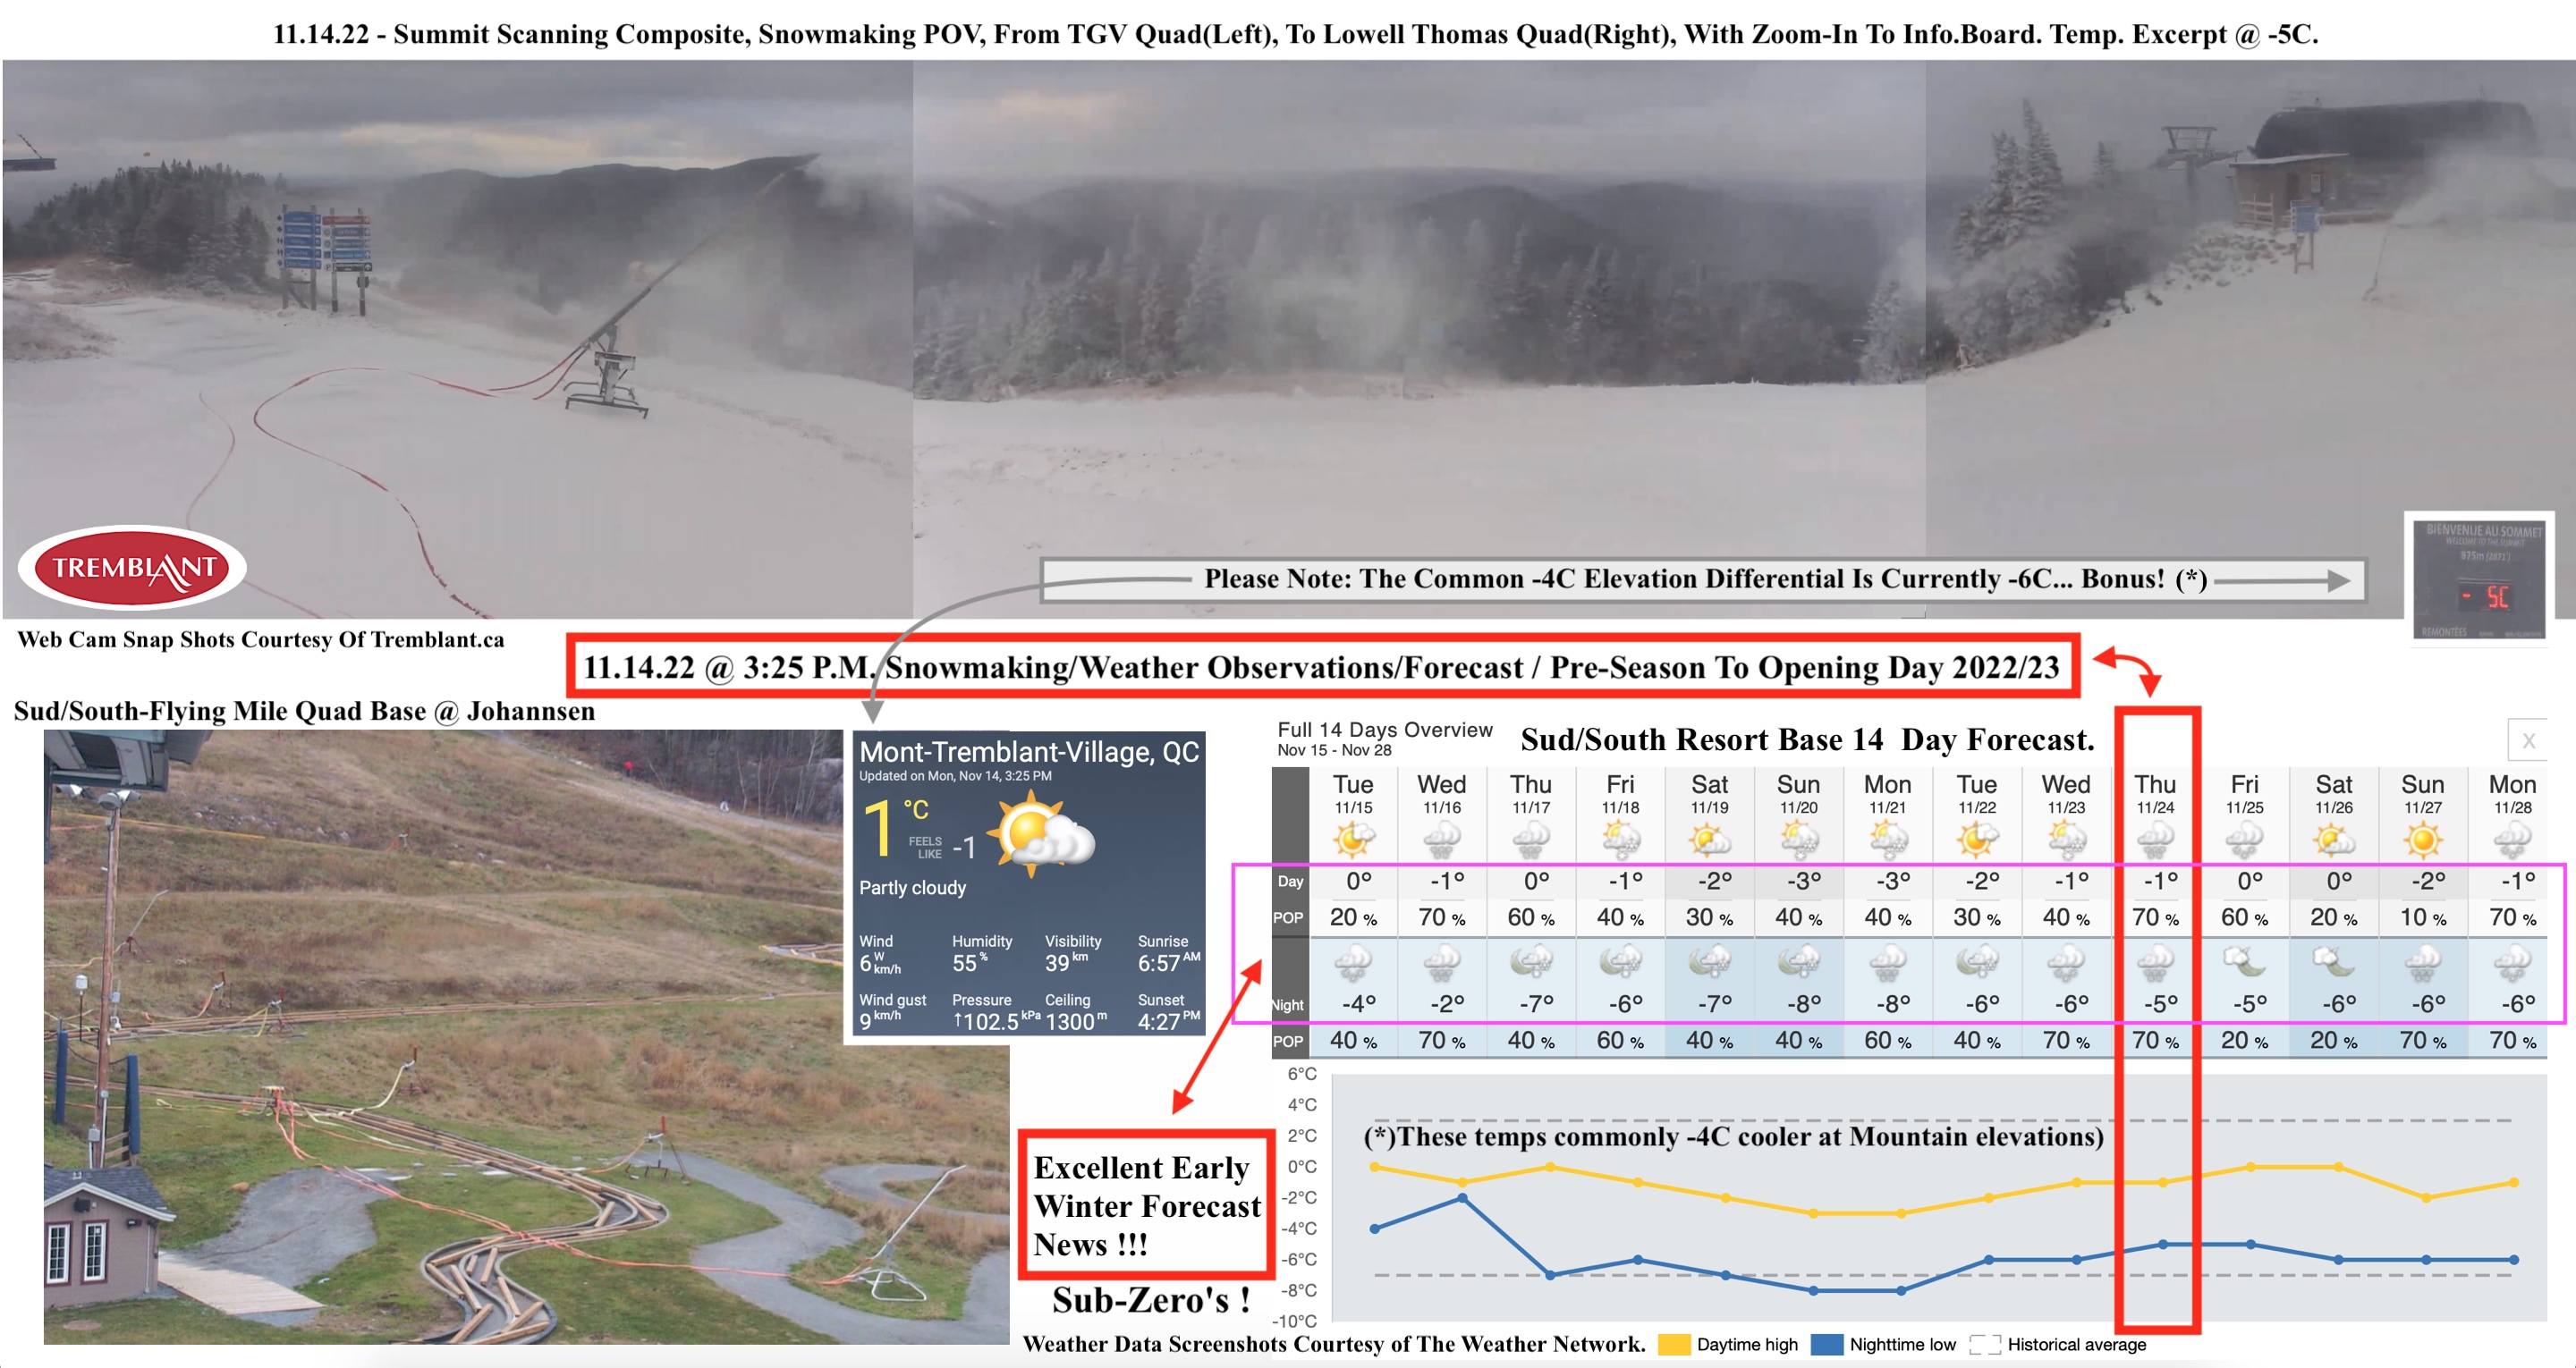 11.14.22.3.25.PM.Snowmaking.Weather.Observations.Forecast.Data.a.jpg